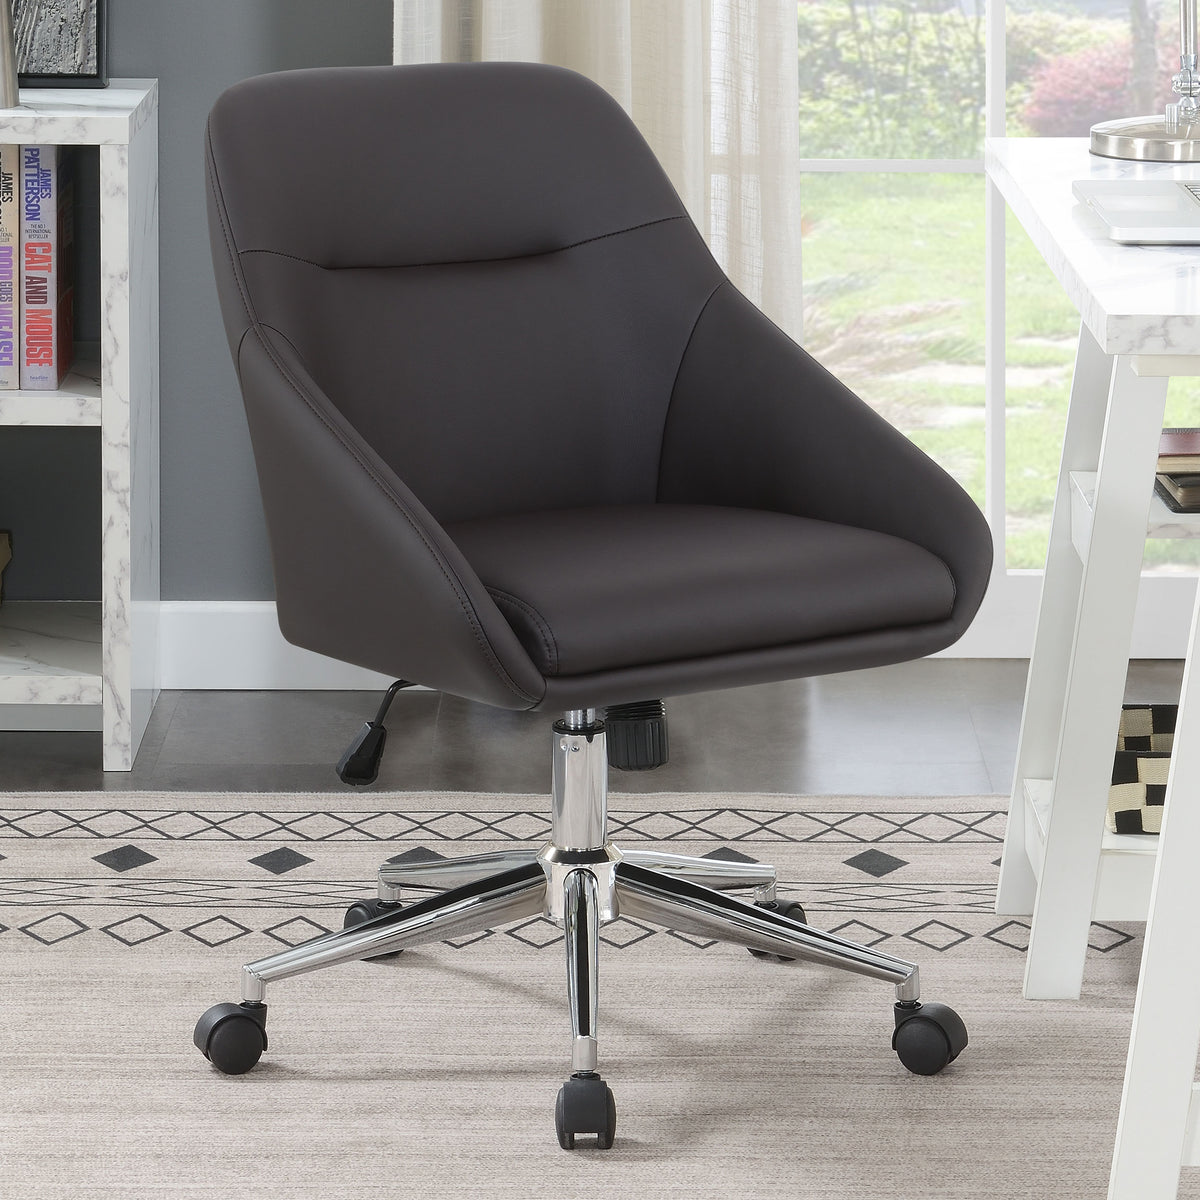 Jackman Upholstered Office Chair with Casters - Half Price Furniture